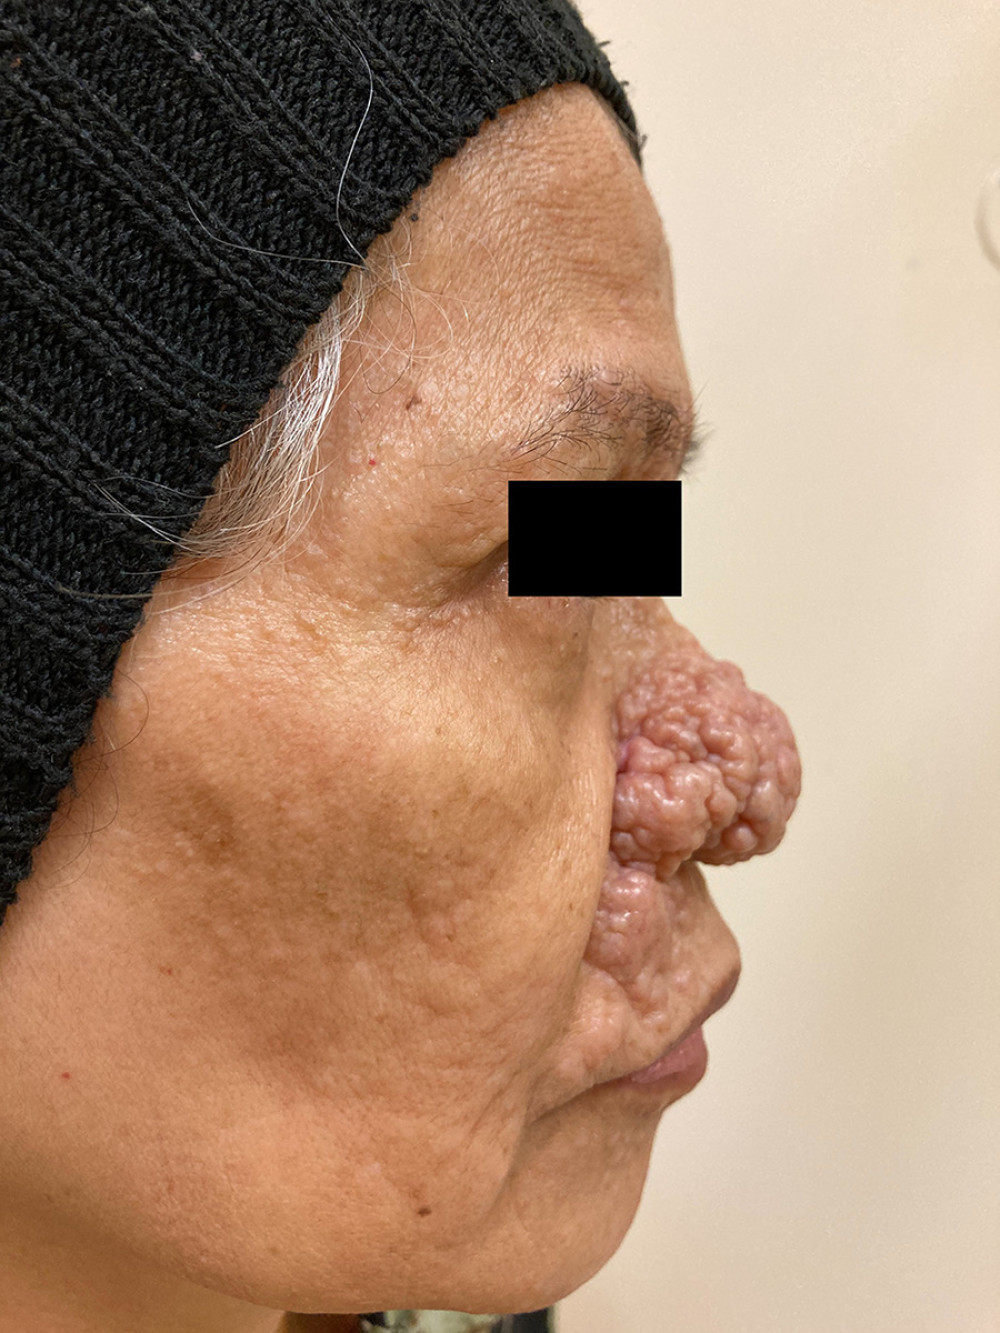 Numerous skin-colored papules on the right side of the patient’s face, most prominent on the nose.